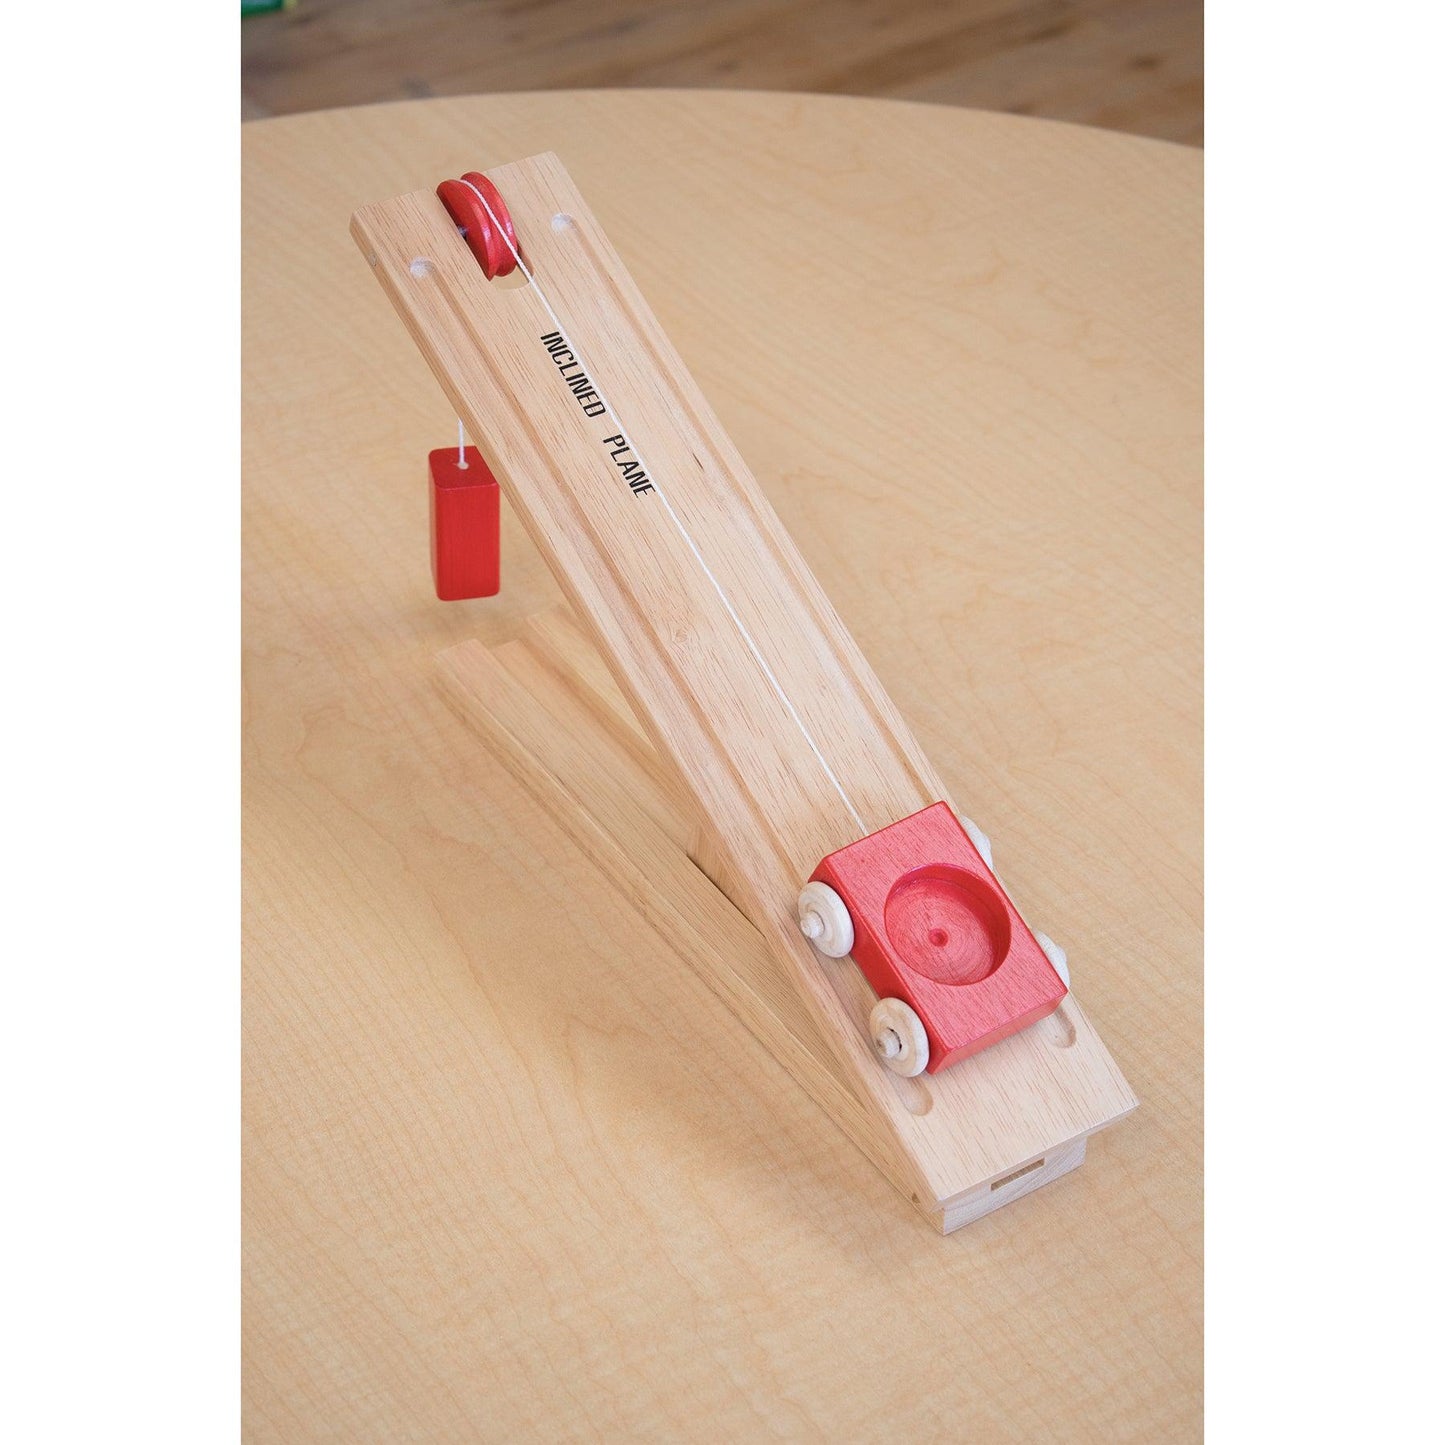 Simple Machines Inclined Plane - Loomini